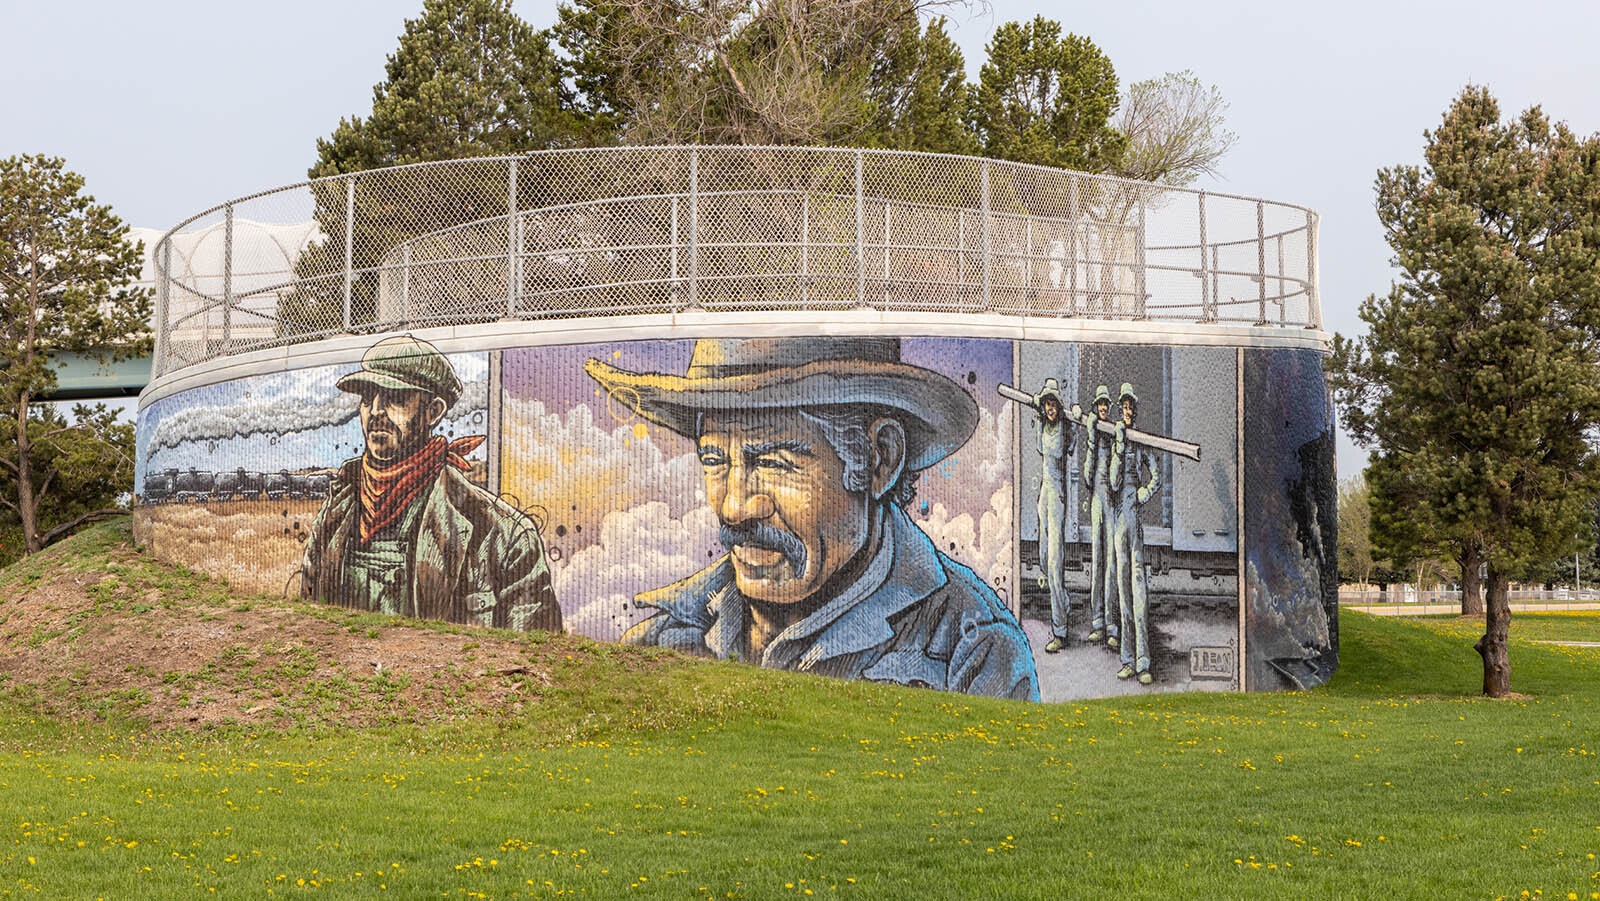 This gallery of photos shows a large, sweeping mural on the pedestrian overpass on West 7th Street and Central Avenue in Cheyenne. It was painted by Jordan Dean.